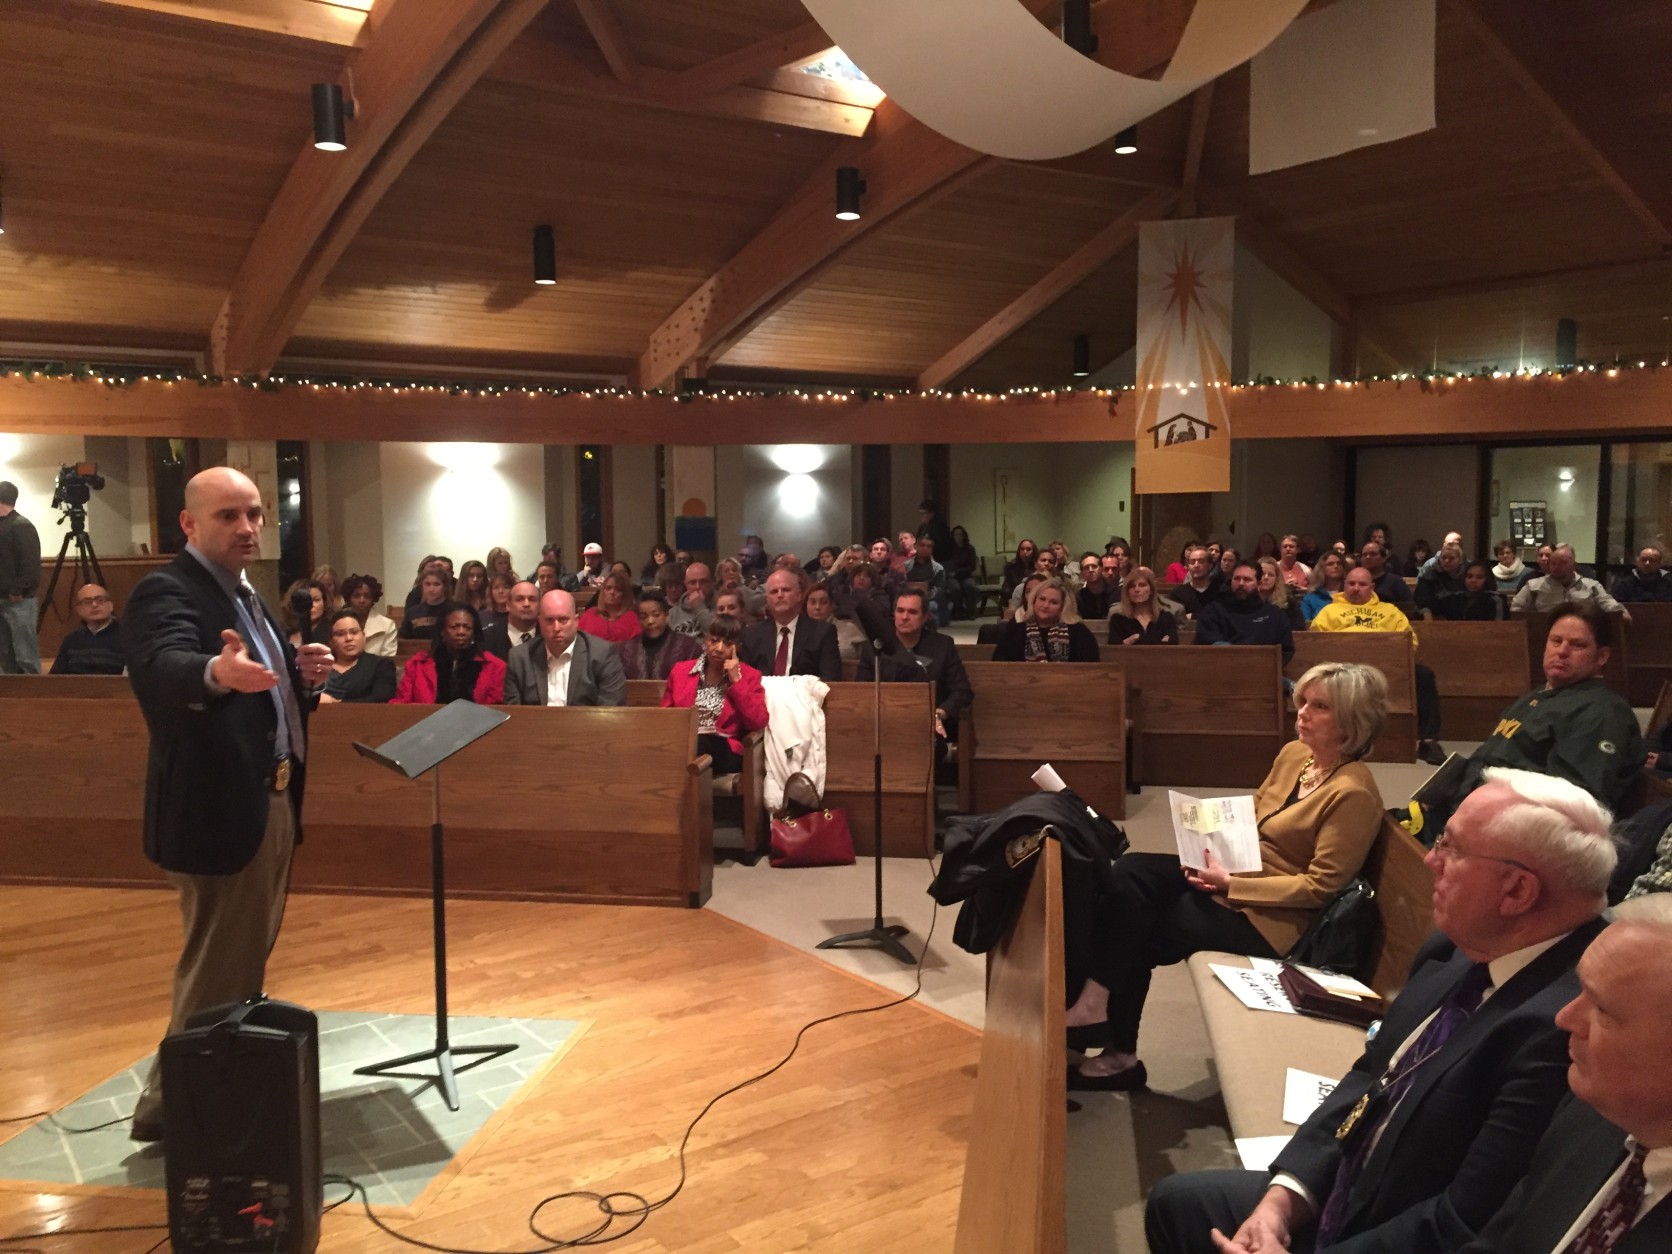 A community meeting was held at St. Matthew’s Lutheran Church in Woodbridge on Jan. 18, 2016. (WTOP/Mike Murillo)